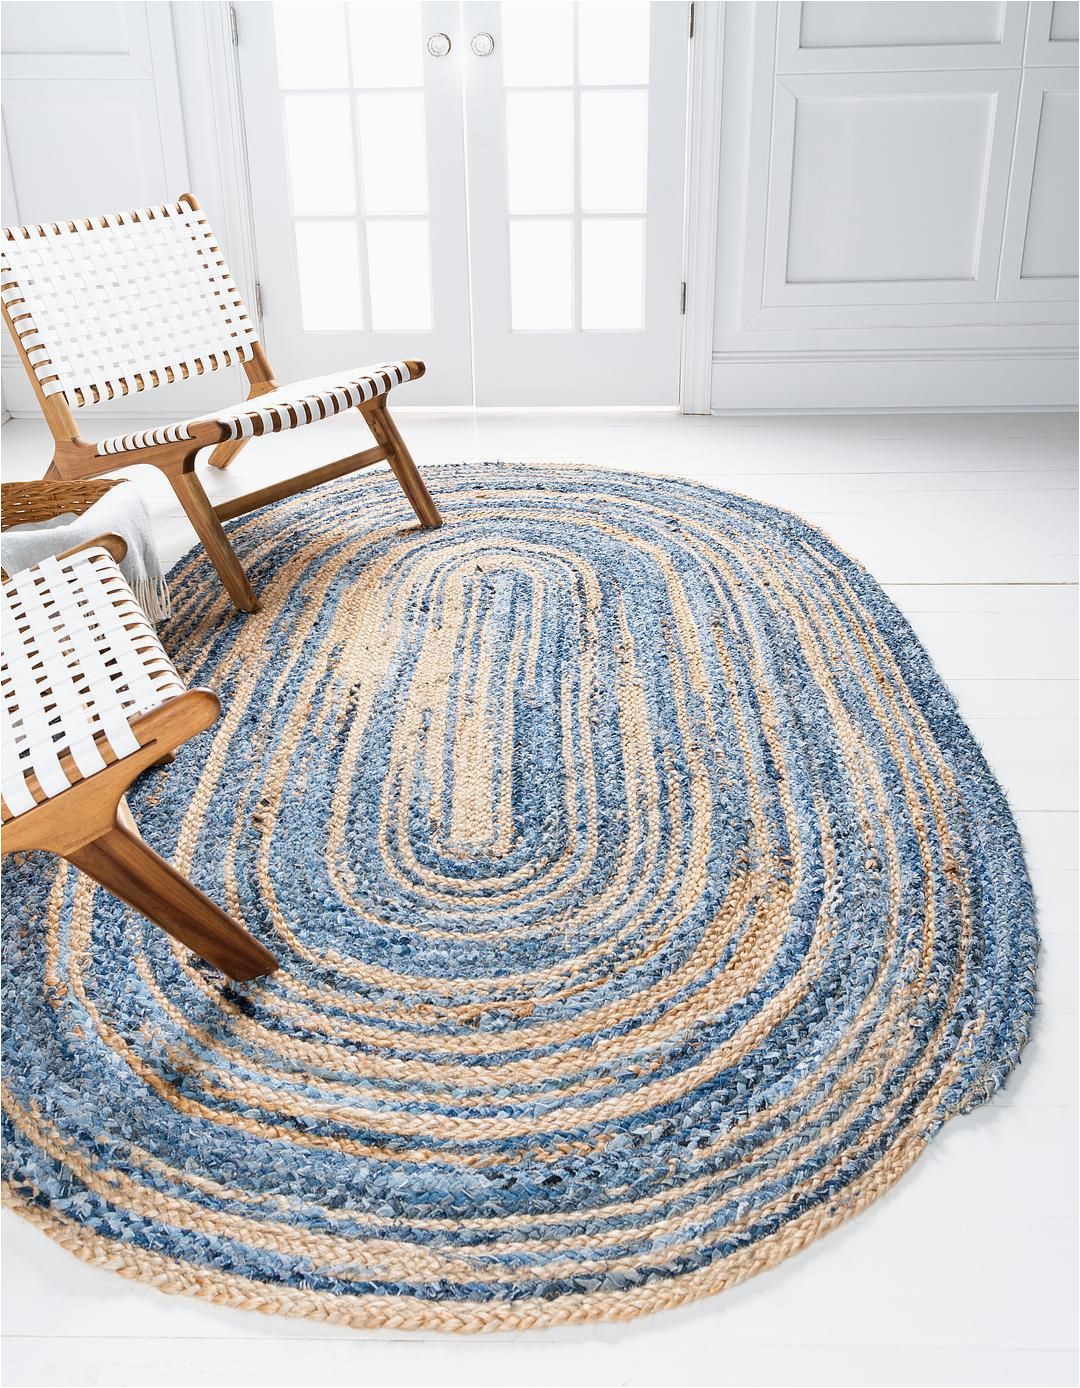 Blue Oval area Rugs Blue 5 X 8 Braided Chindi Oval Rug area Rugs